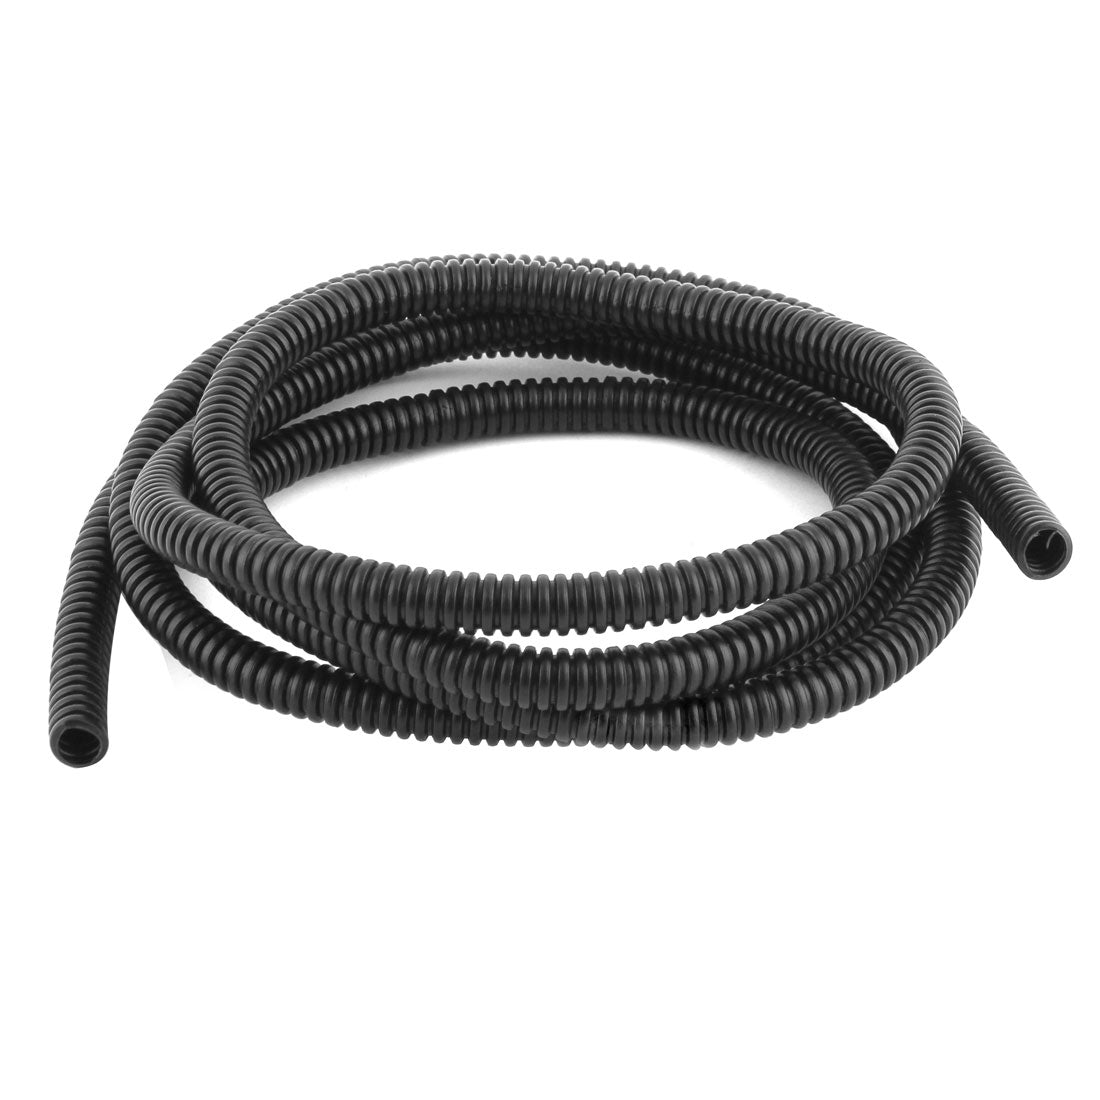 uxcell Uxcell 1.92 M 9 x 13 mm Plastic Corrugated Conduit Tube for Garden,Office Black